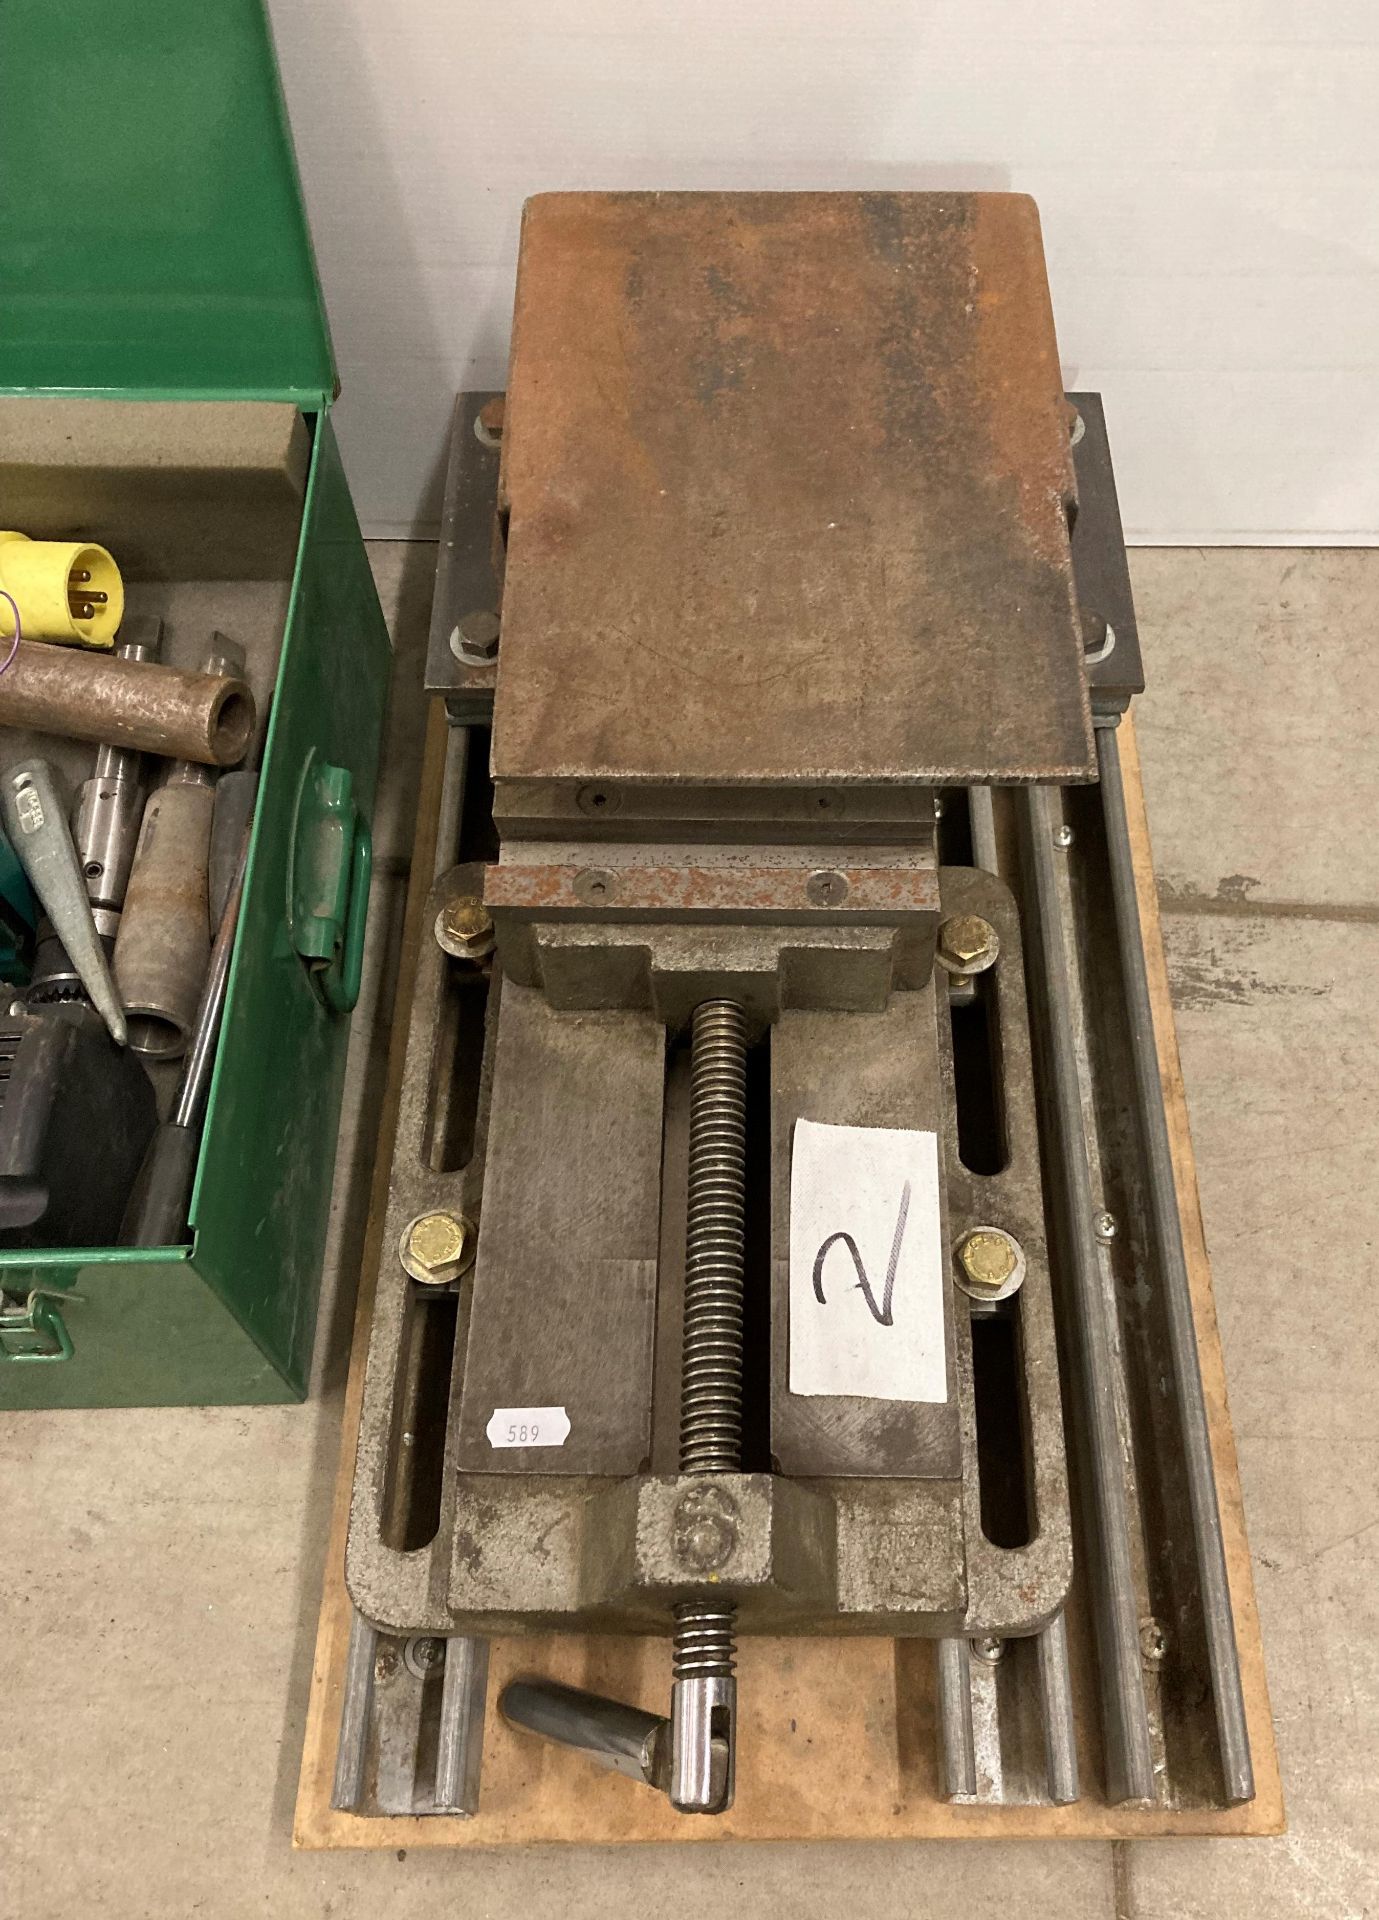 EIBENSTOCK EHB 110V MAG DRILL WITH METAL PACE UNIT AND ACCESSORIES (saleroom location: H08) - Image 3 of 4